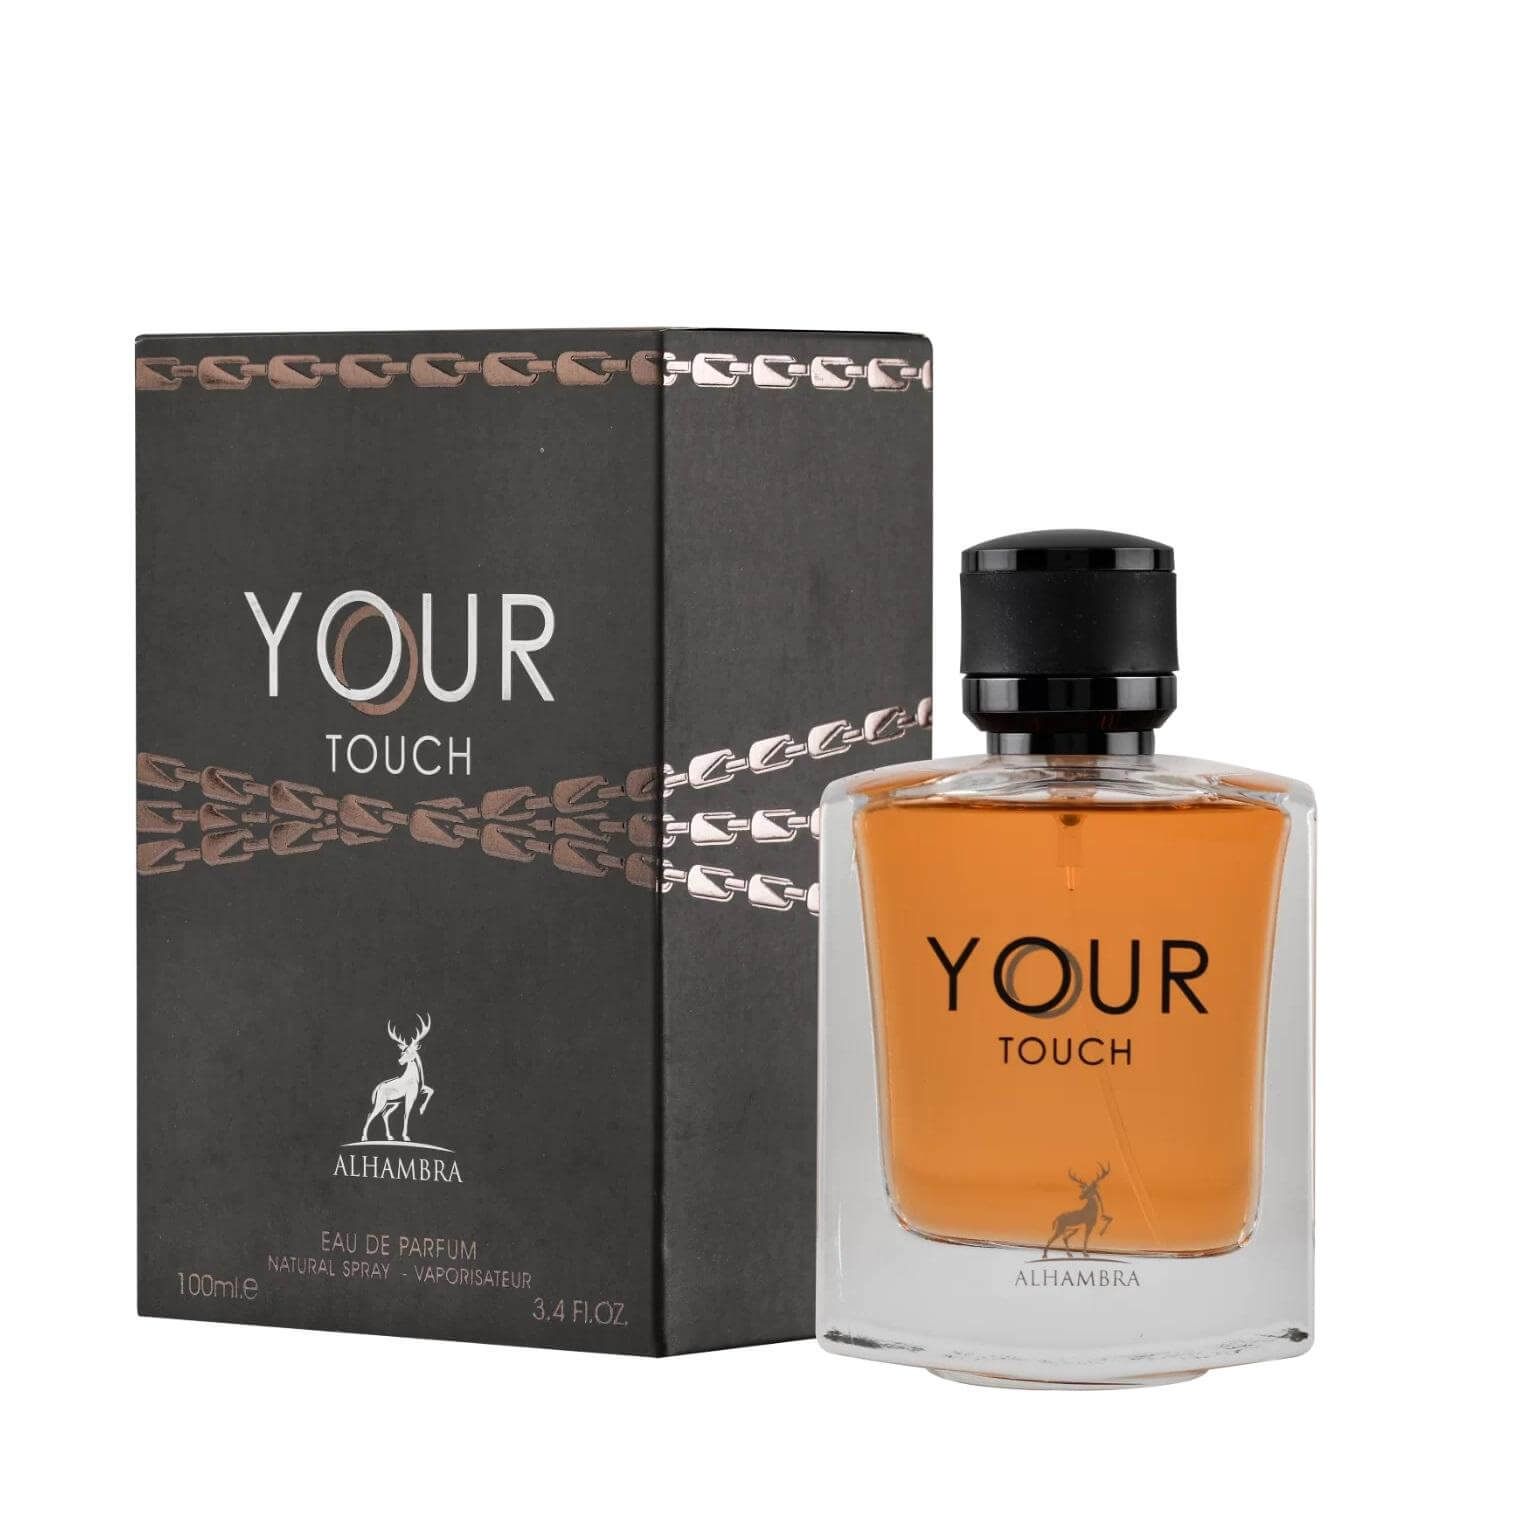 Your Touch Men Perfume / Eau De Parfum 100Ml By Maison Alhambra / Lattafa (Inspired By Emporio Armani Stronger With You)